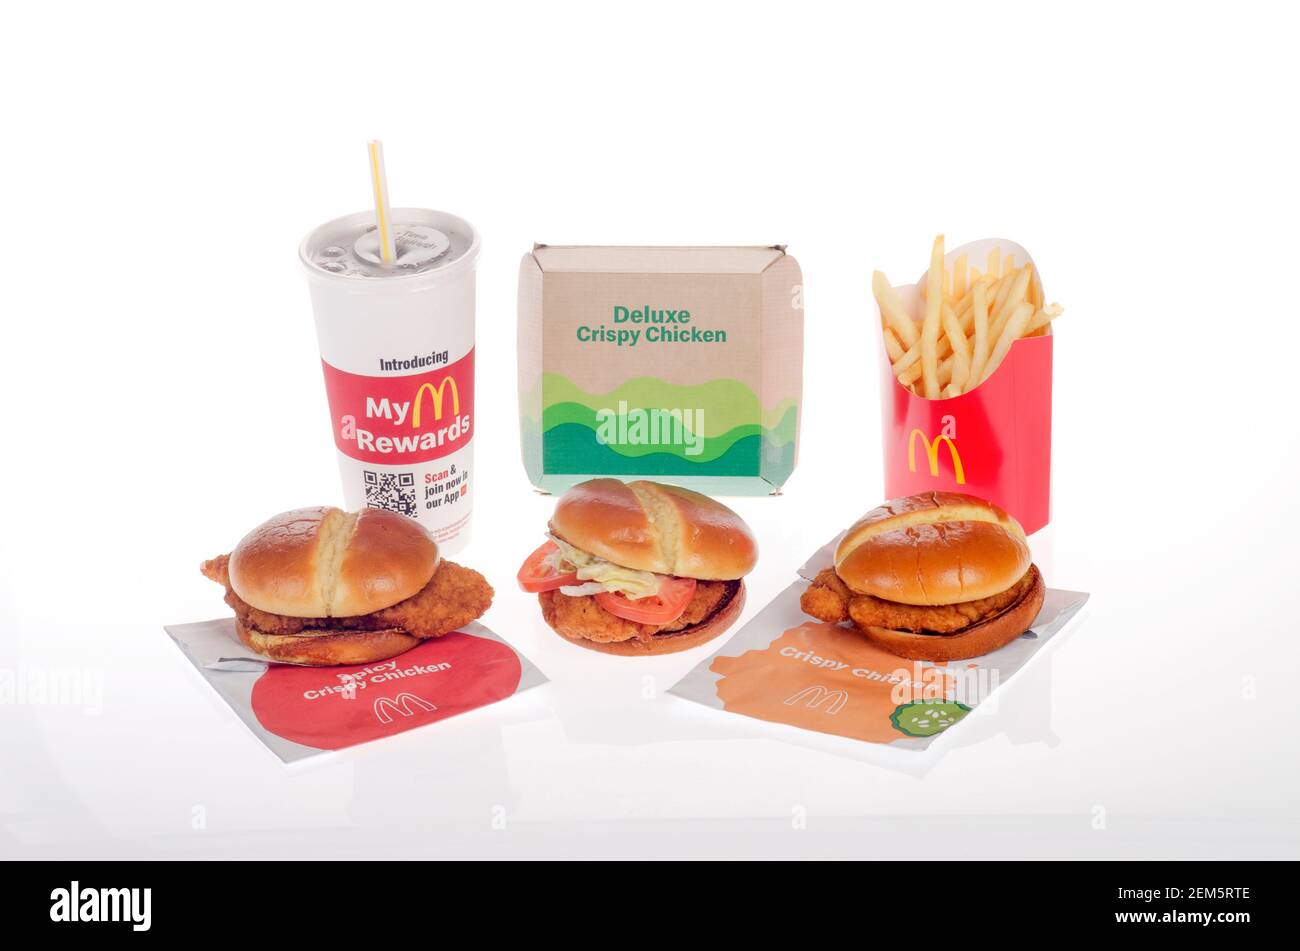 McDonalds Crispy Chicken Sandwich assortment with the Crispy, Deluxe & Spicy  released February 24th, 2021 Stock Photo